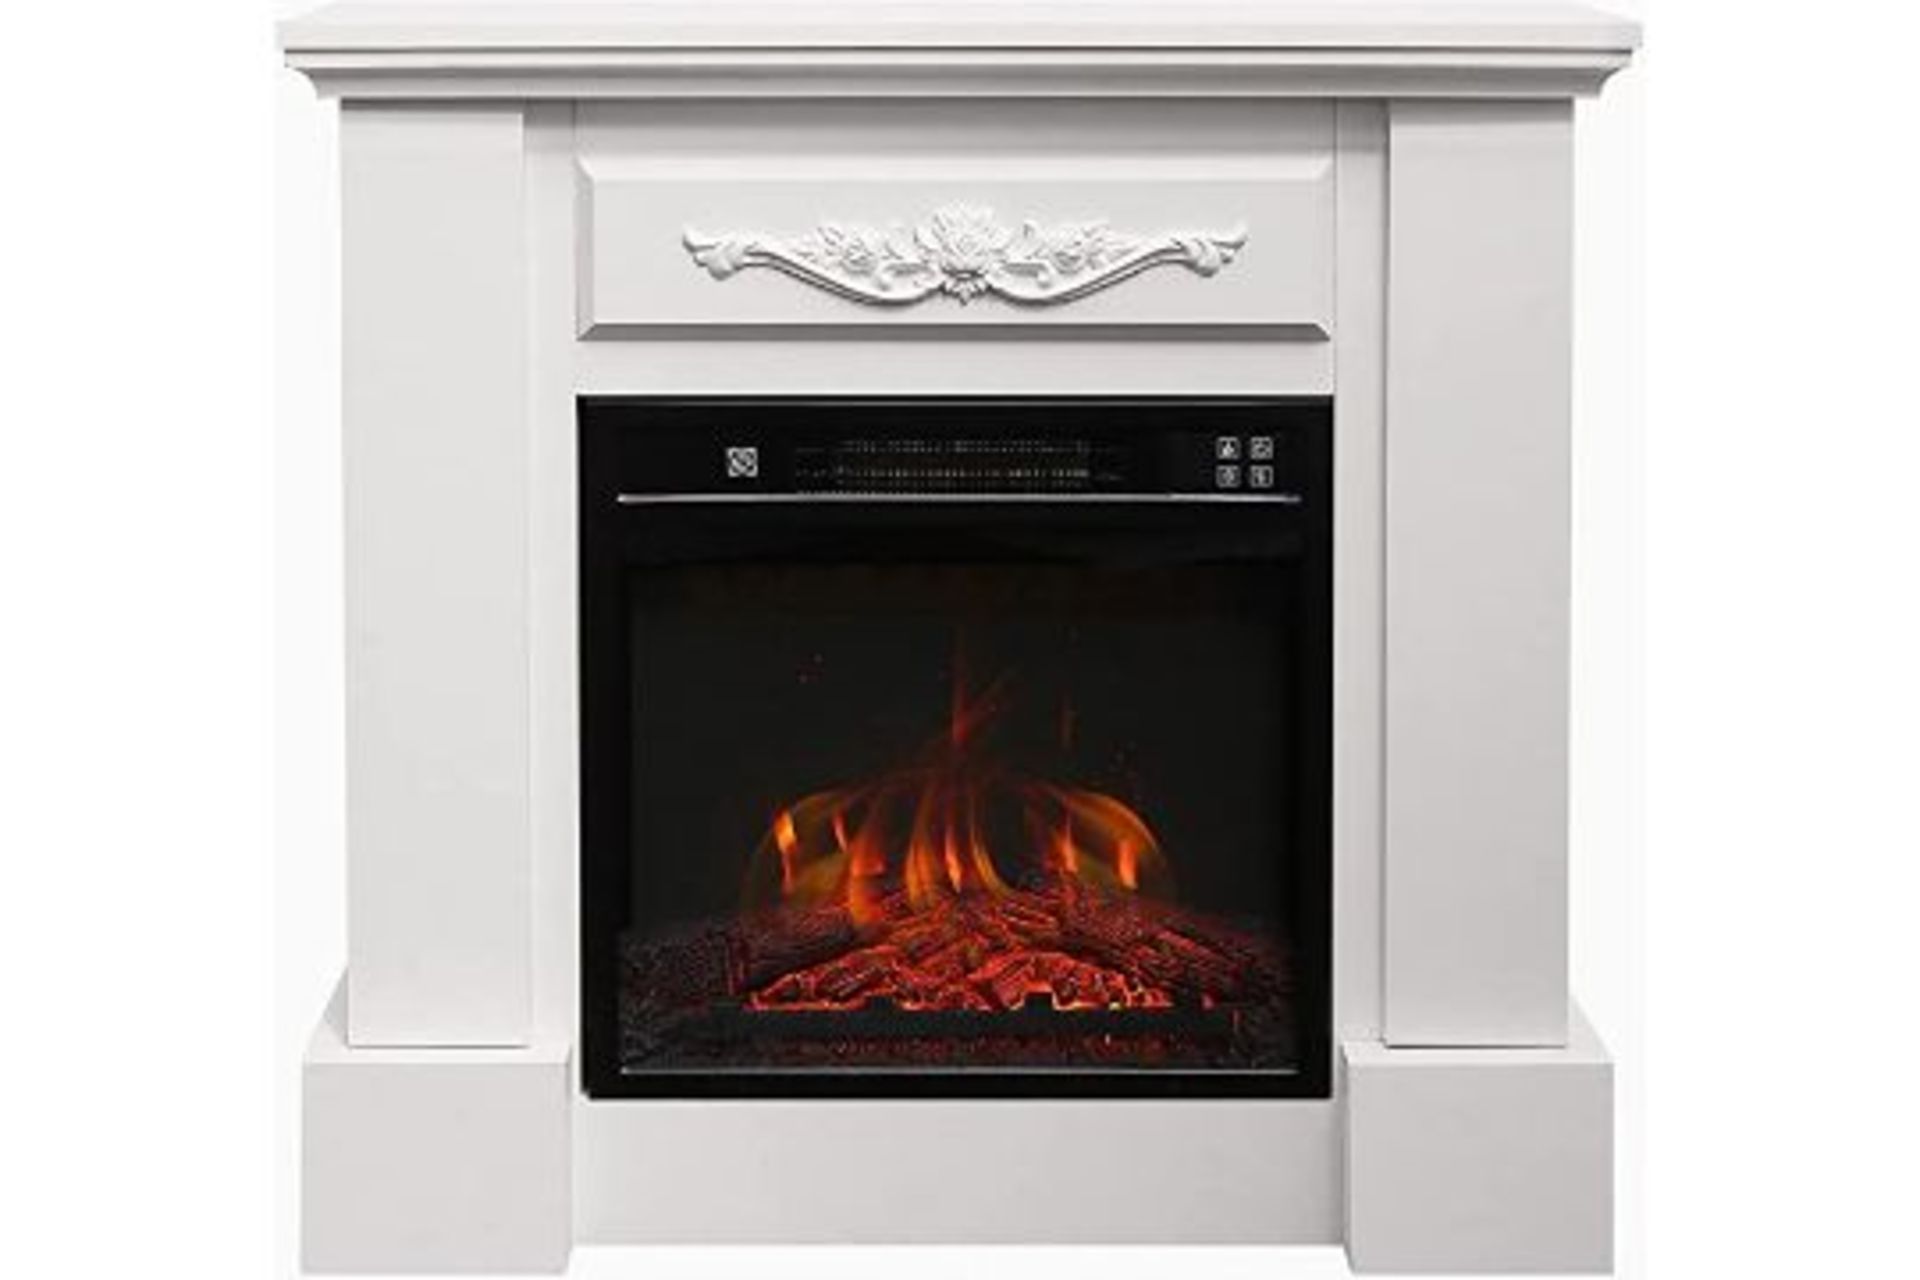 PALLET TO CONTAIN 5 X BRAND NEW ELECTRIC FIRE WITH LOG BURNER EFFECT, WITH FIRE SURROUND 17-27